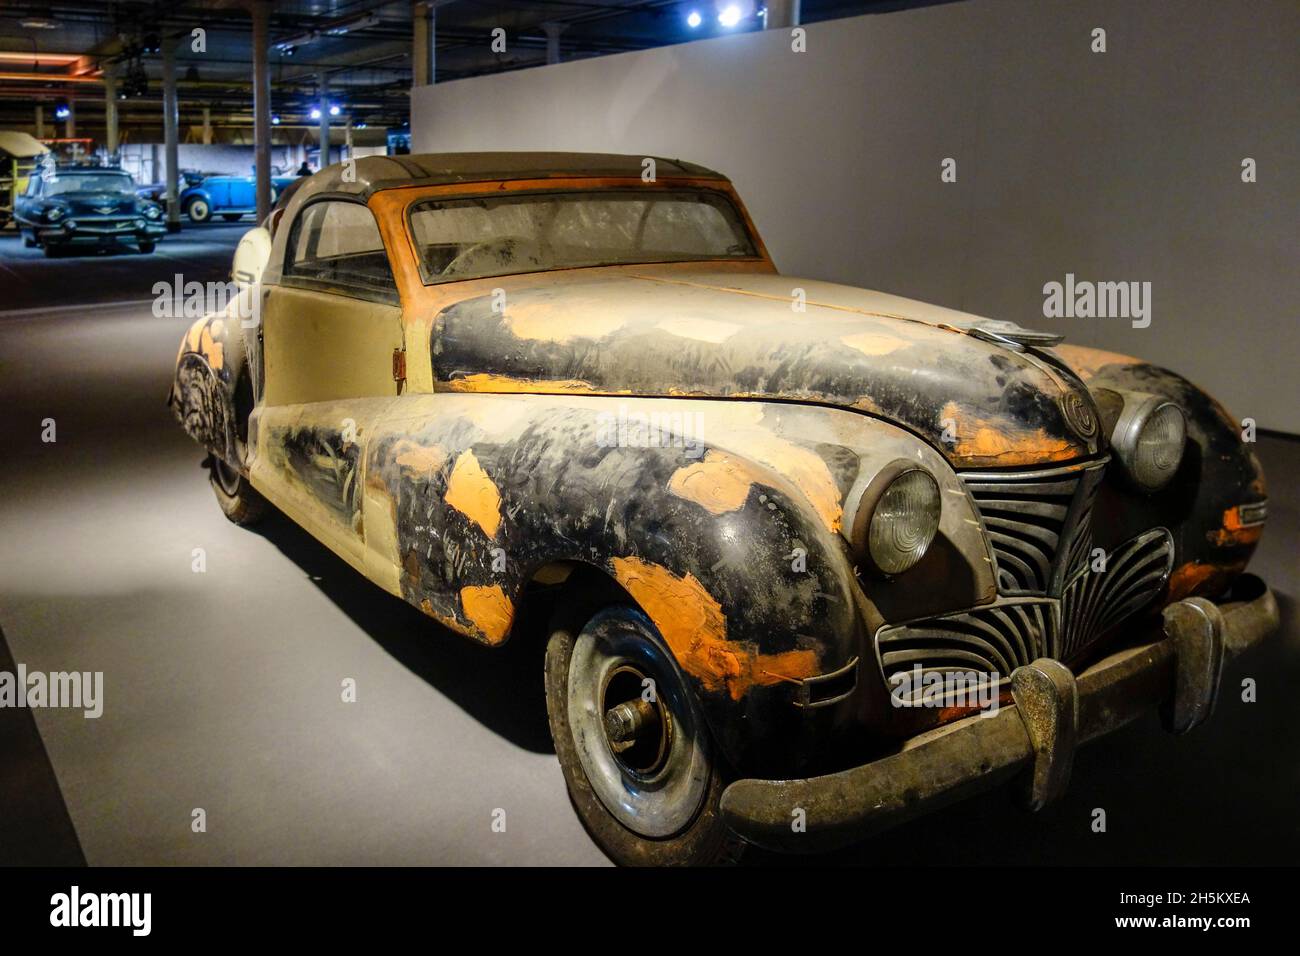 Rusty and dusty 1947 Delahaye 148L Oblin, French classic luxury car / oldtimer, in bad shape ready to be restored in garage Stock Photo